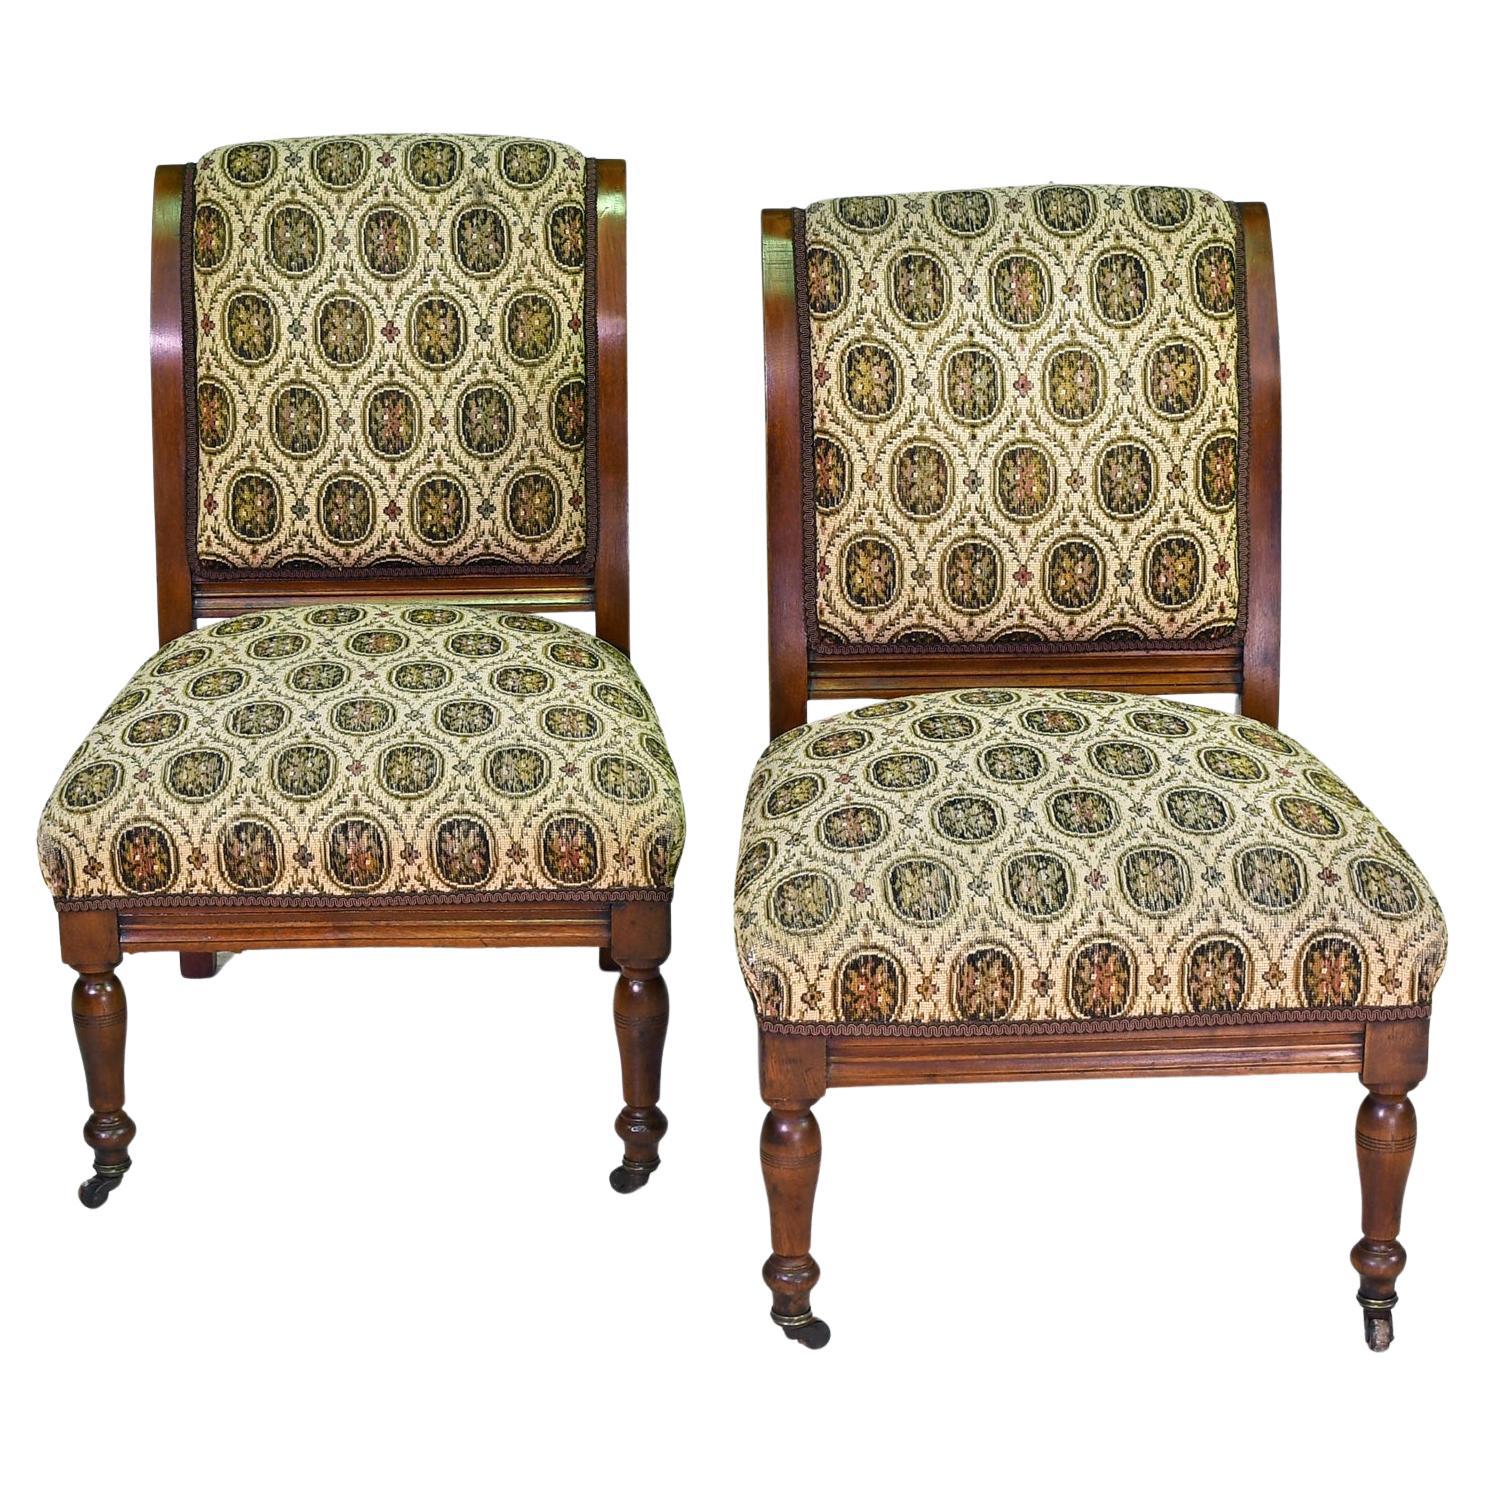 Pair of Antique Victorian Slipper Chairs in Walnut with Upholstered Seat & Back For Sale